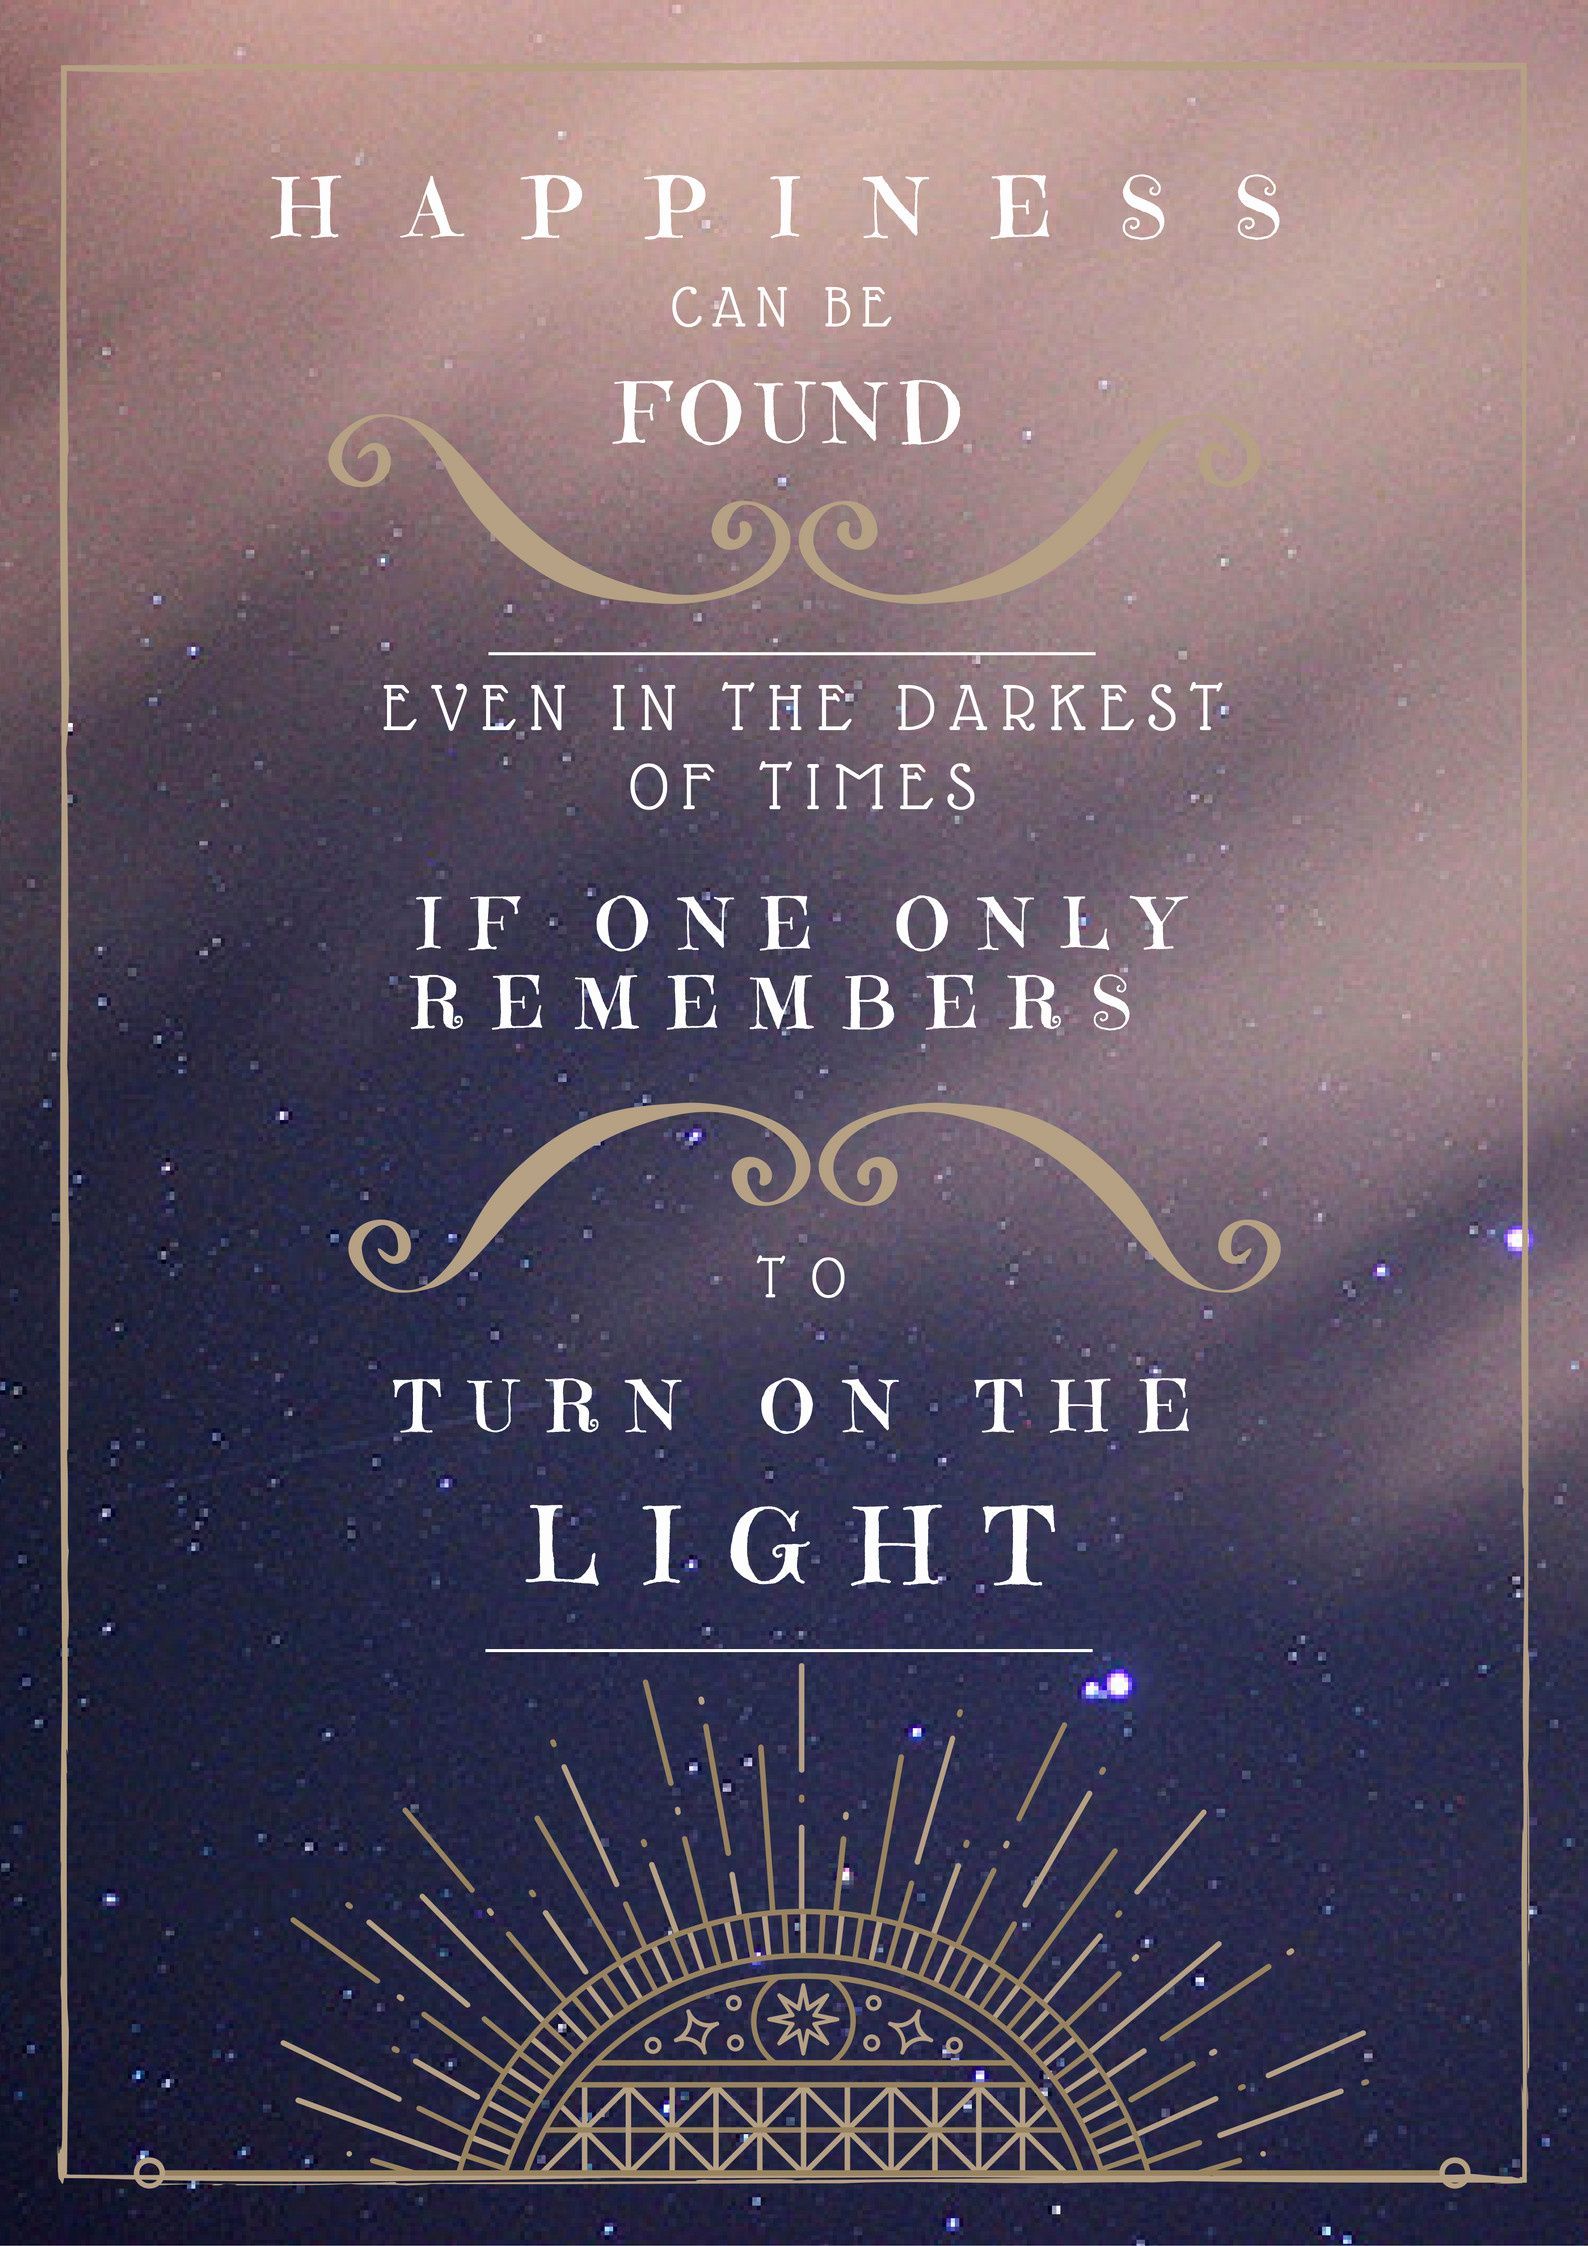 Harry Potter Quotes Iphone Wallpaper QuotesGram